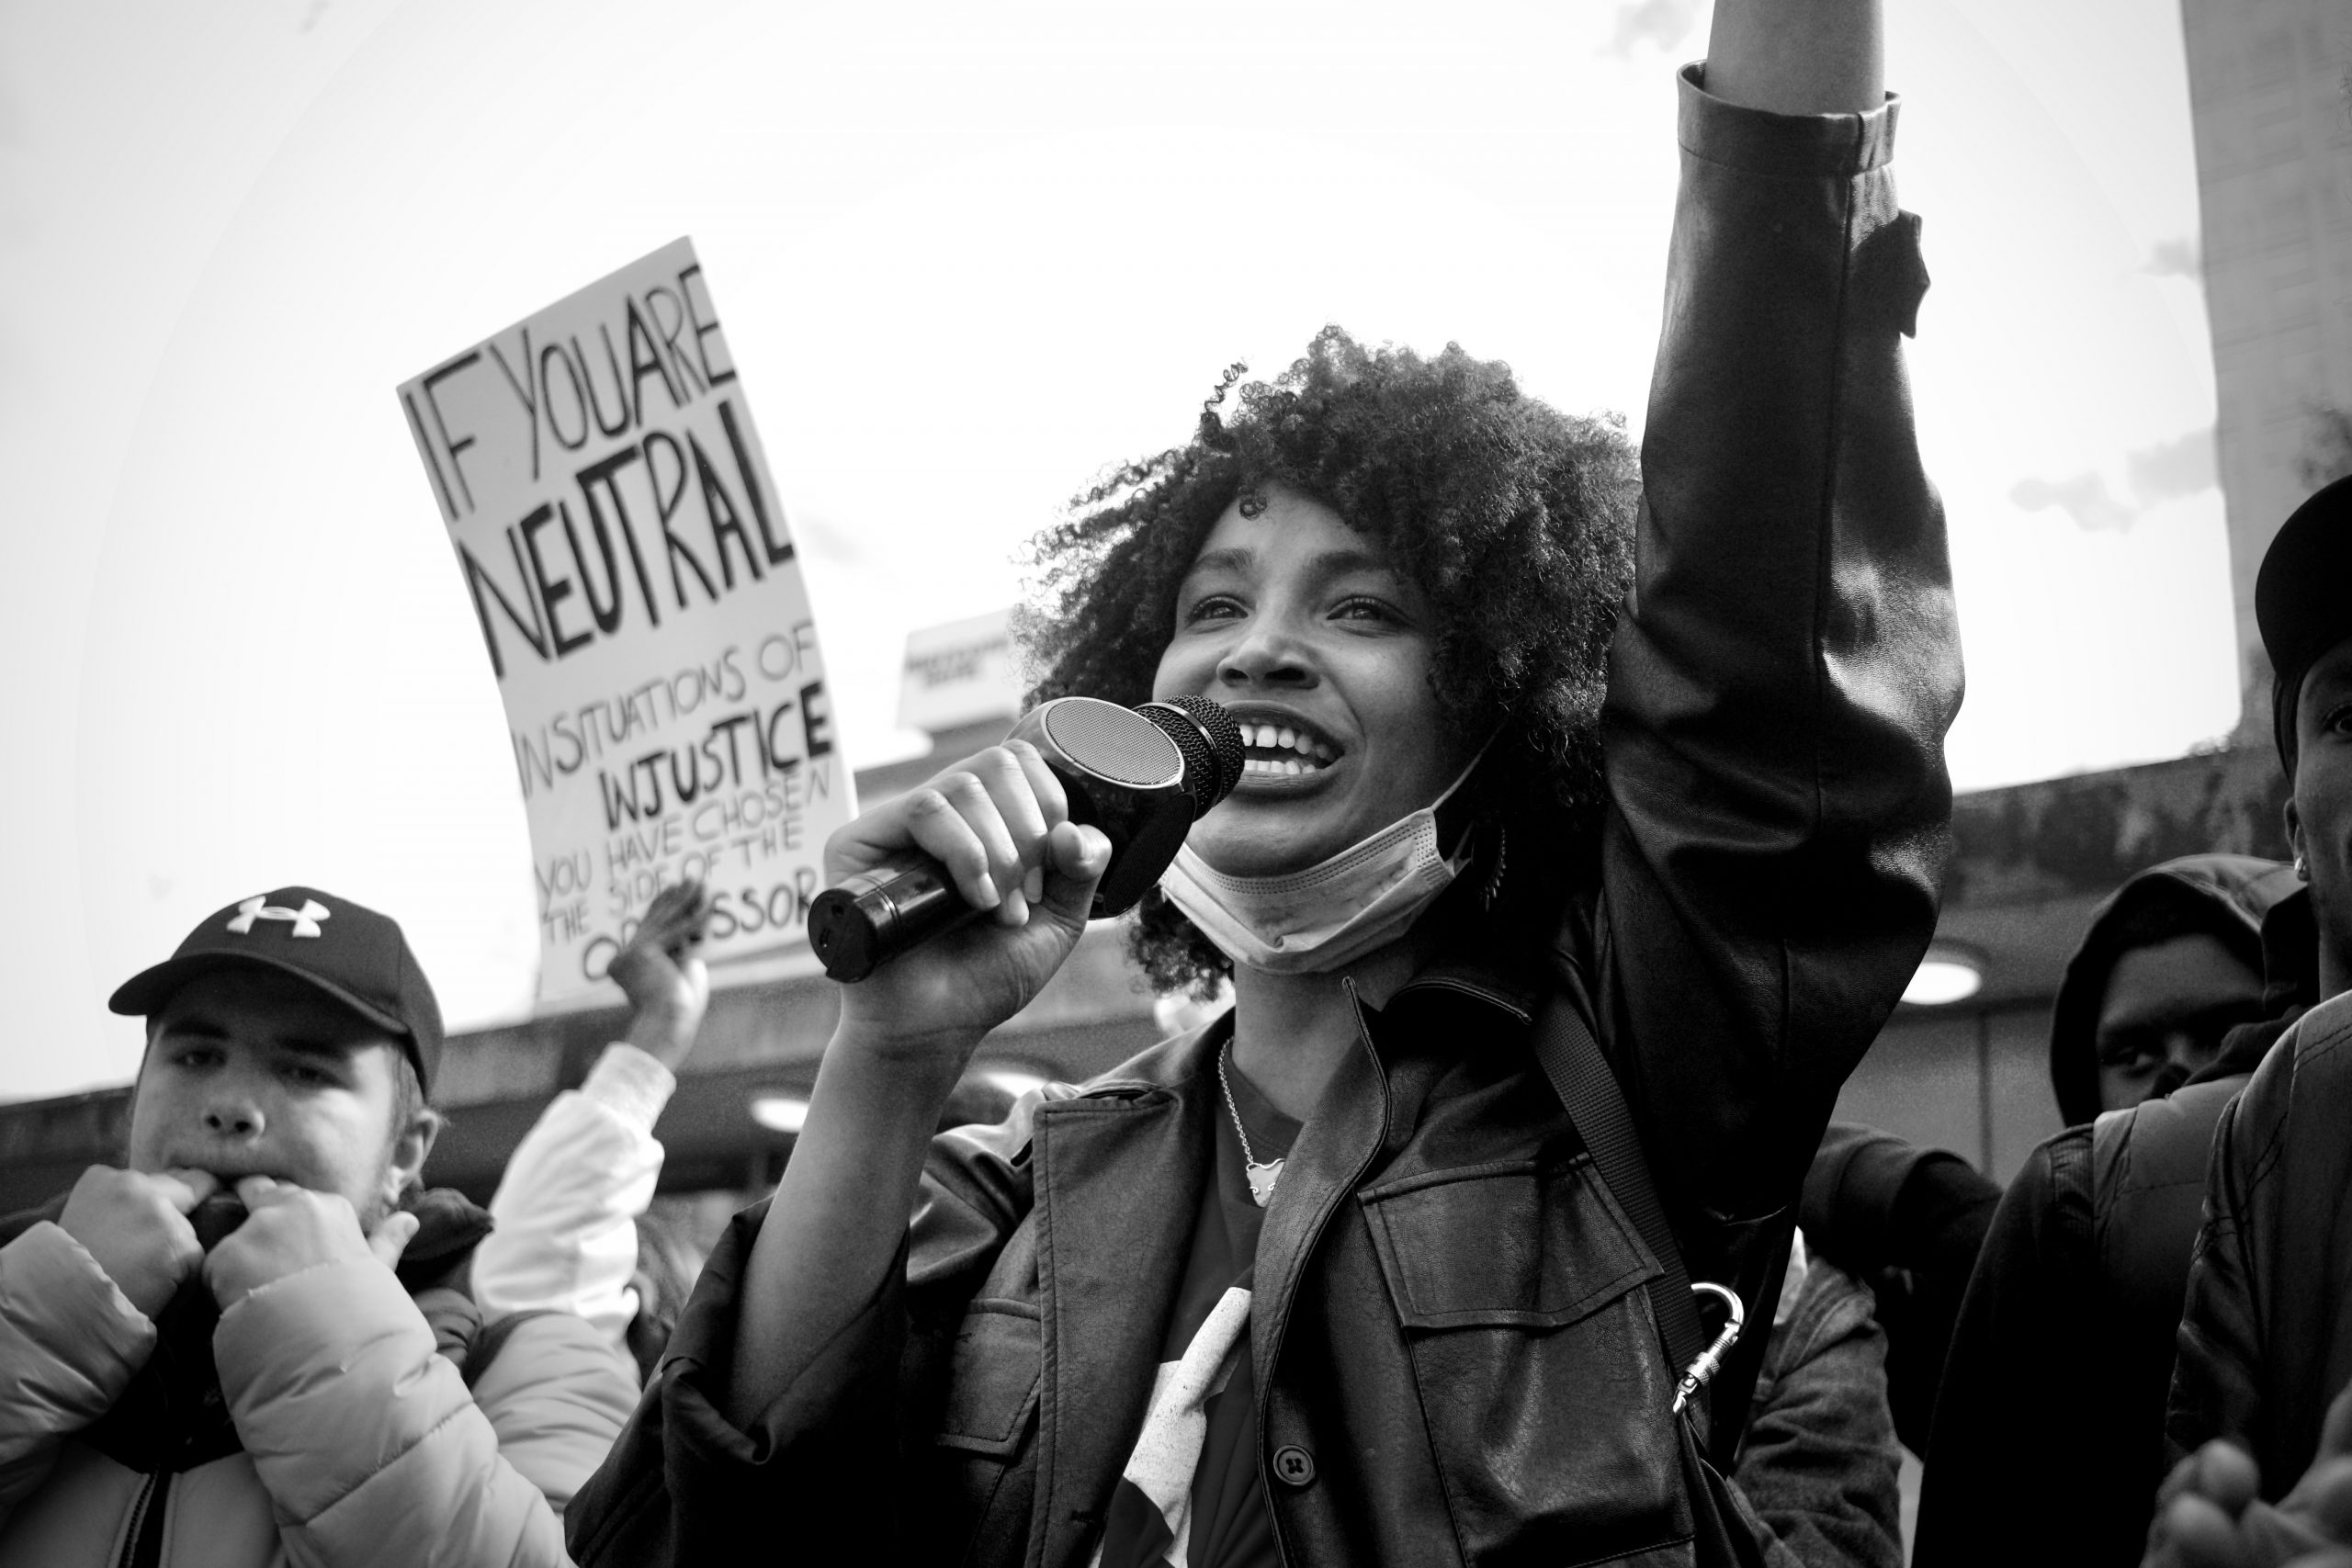 woman protests in a crowd against injustice